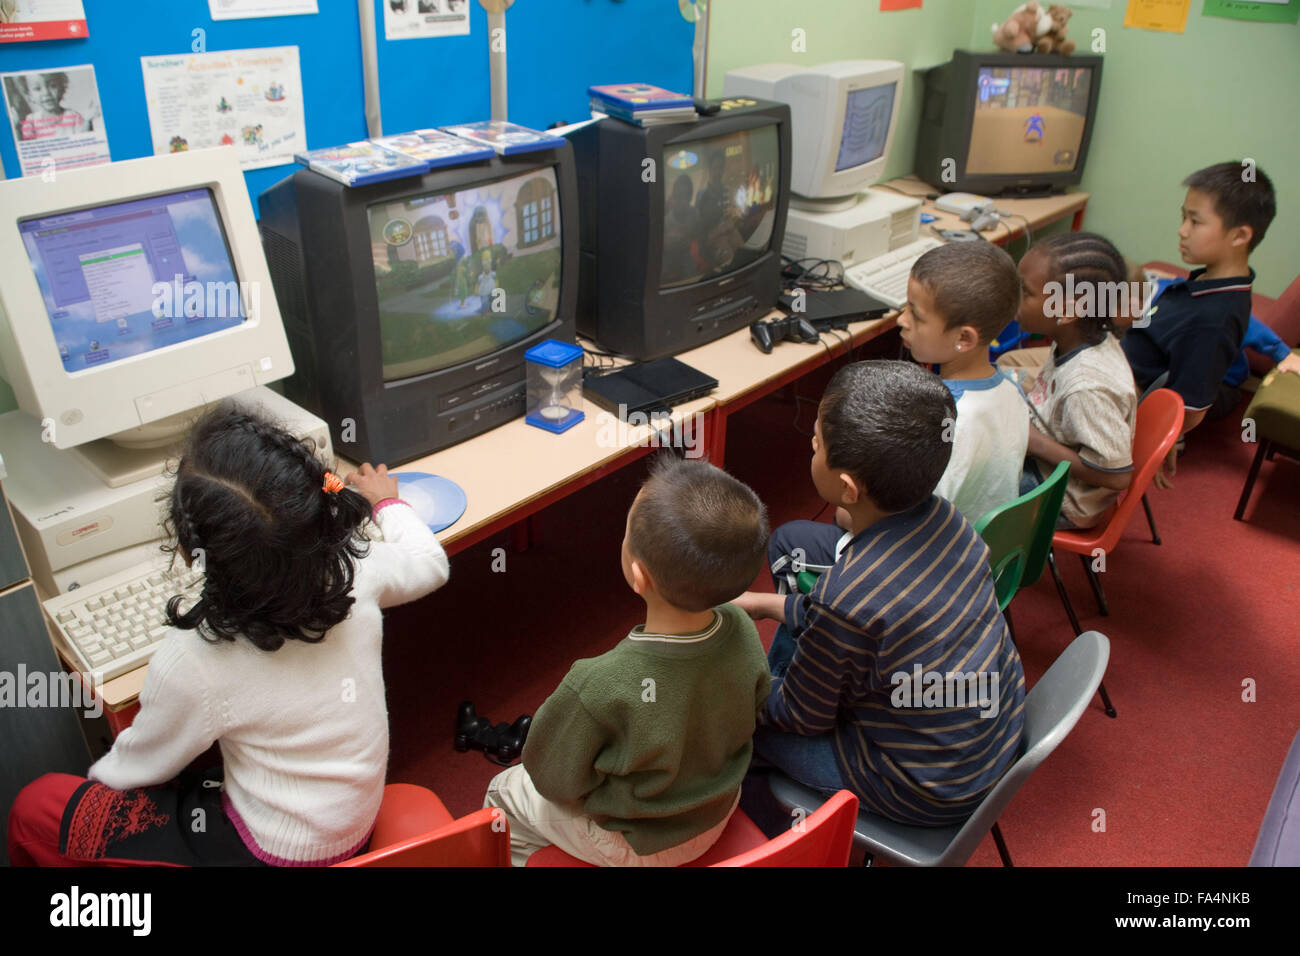 Group of primary school children using computers and watching televisions in classroom, Stock Photo